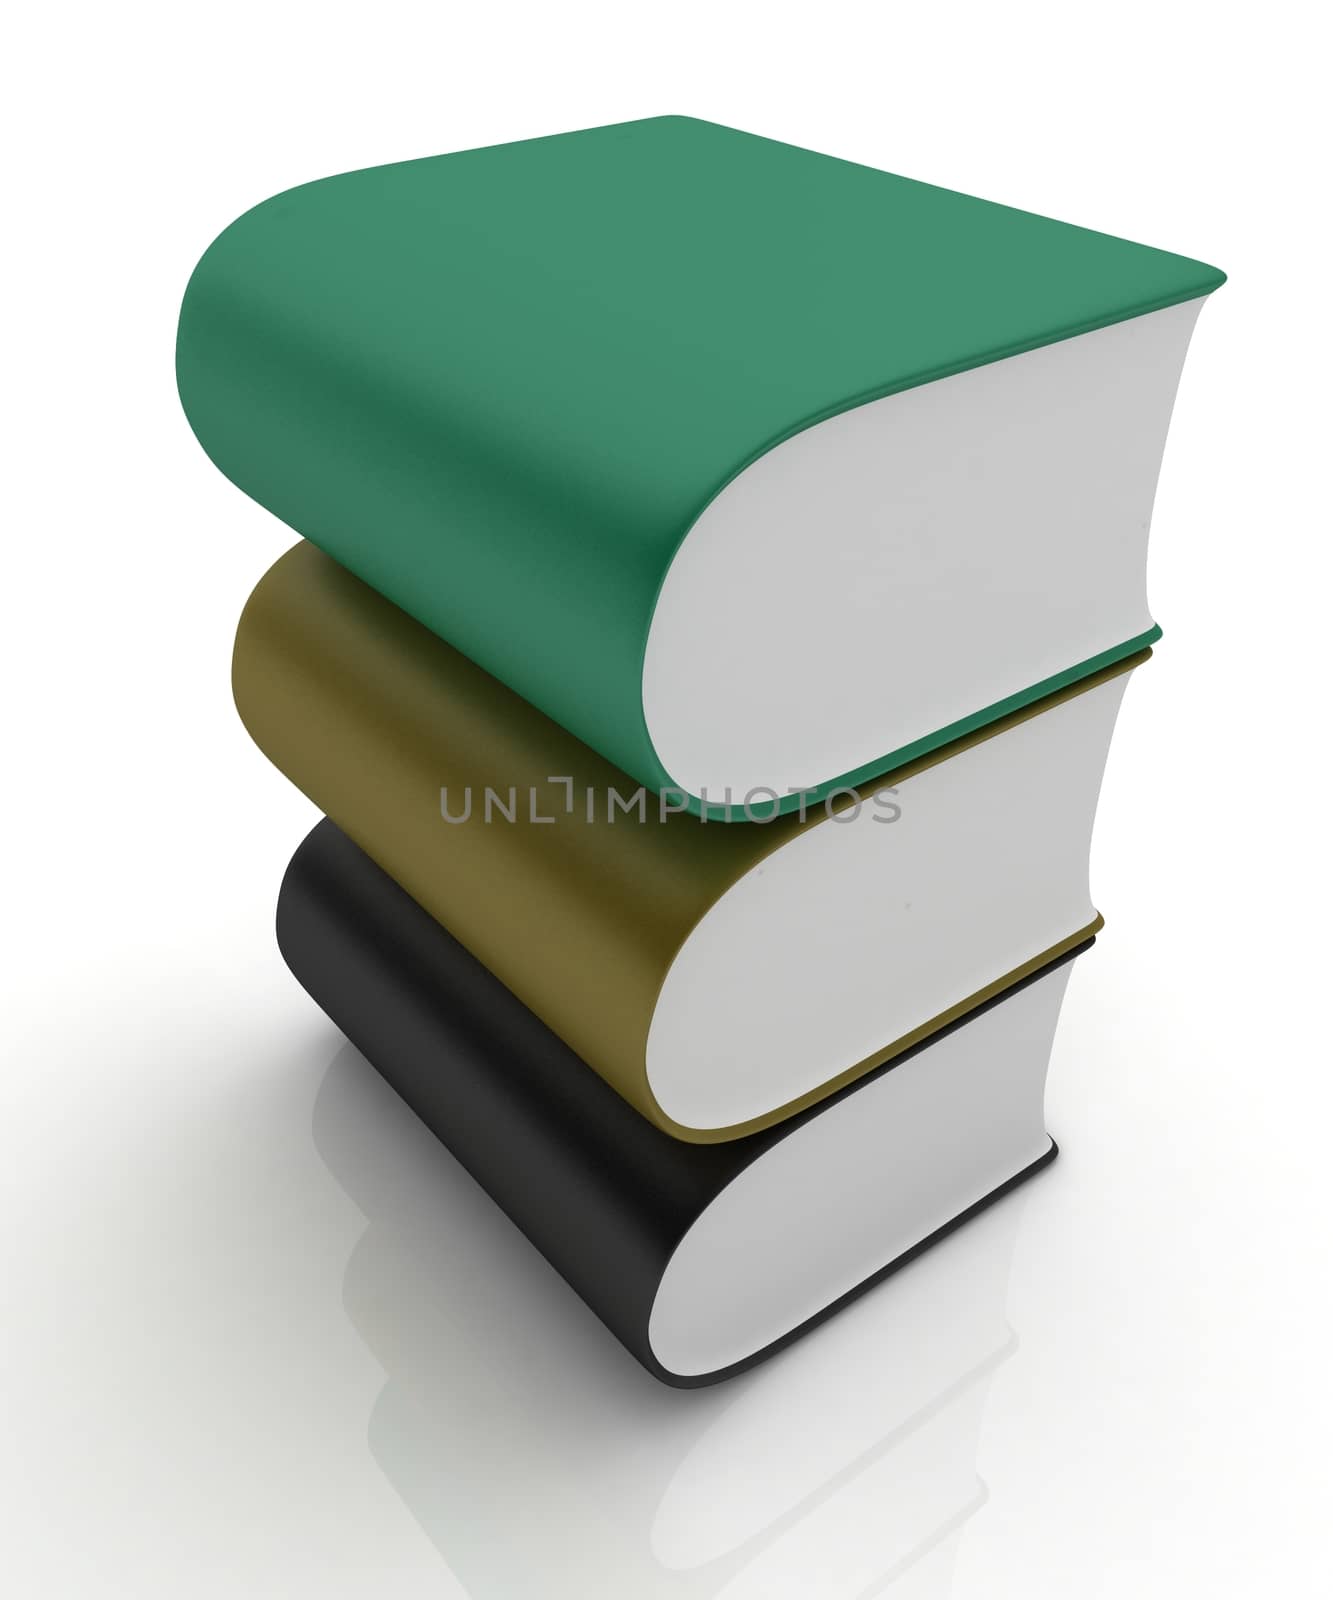 Glossy Books Icon isolated on a white background by Guru3D